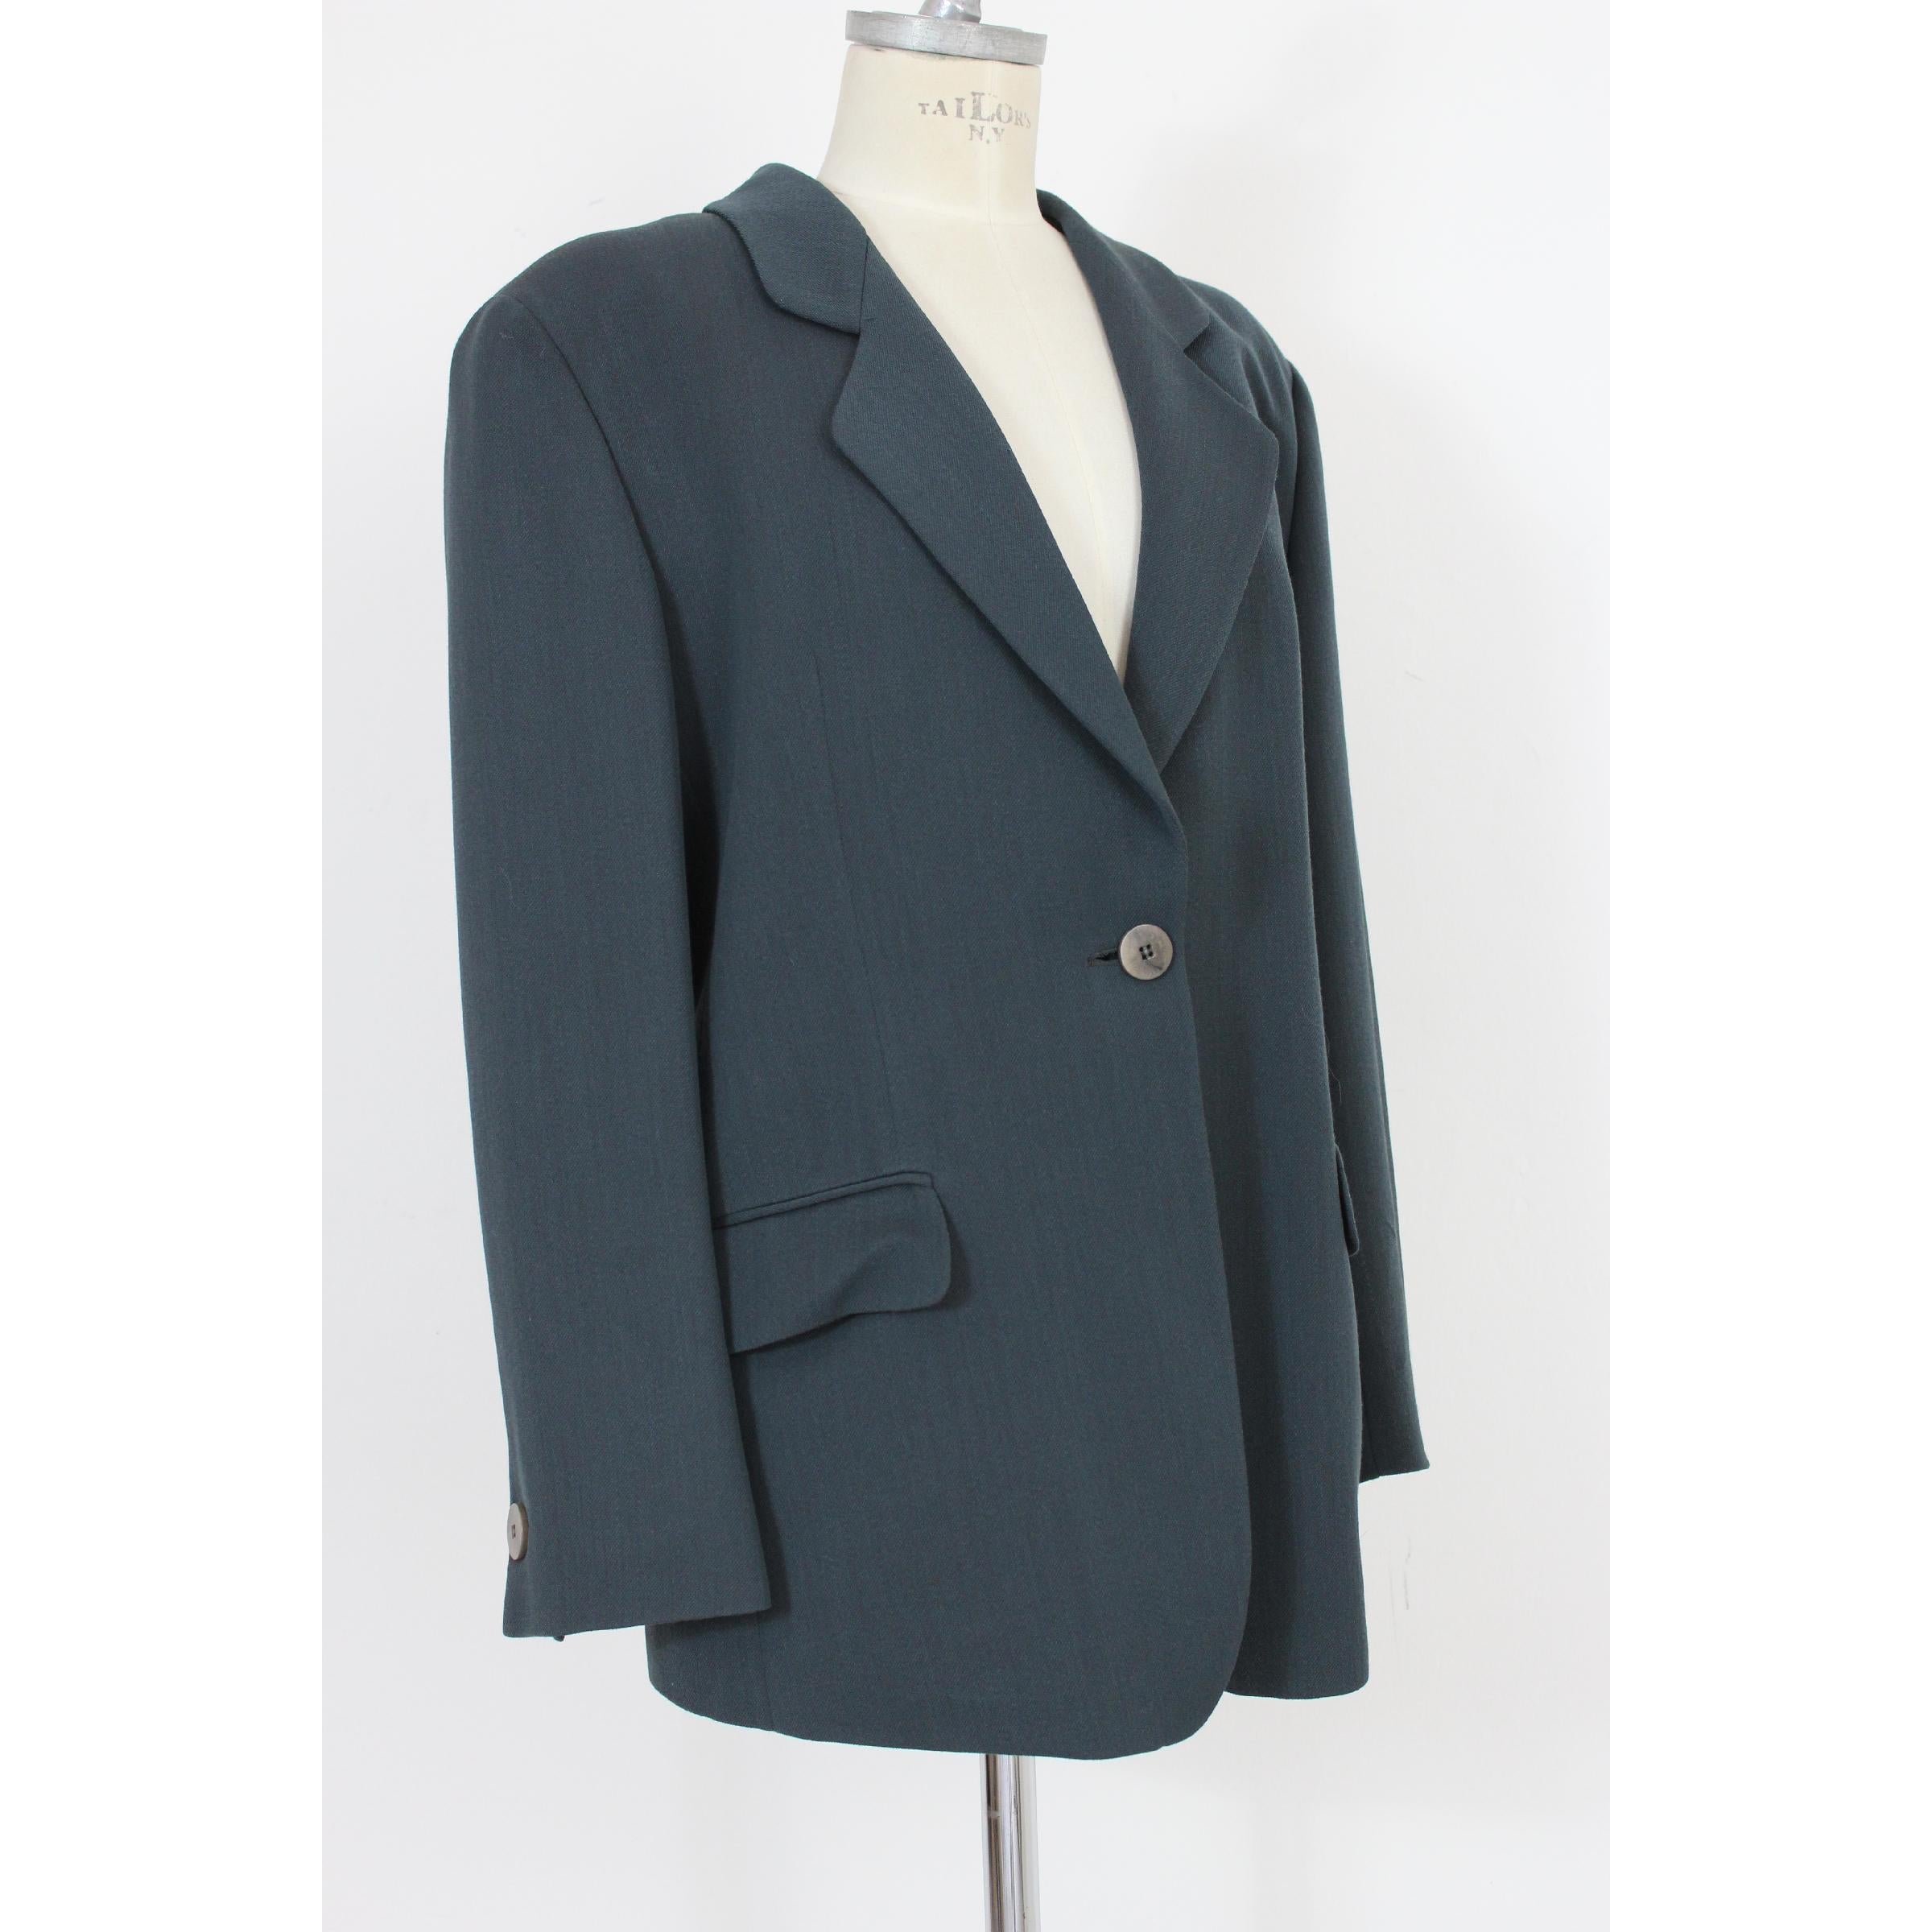 Mani by Armani Green Wool Classic Jacket  In Excellent Condition For Sale In Brindisi, Bt